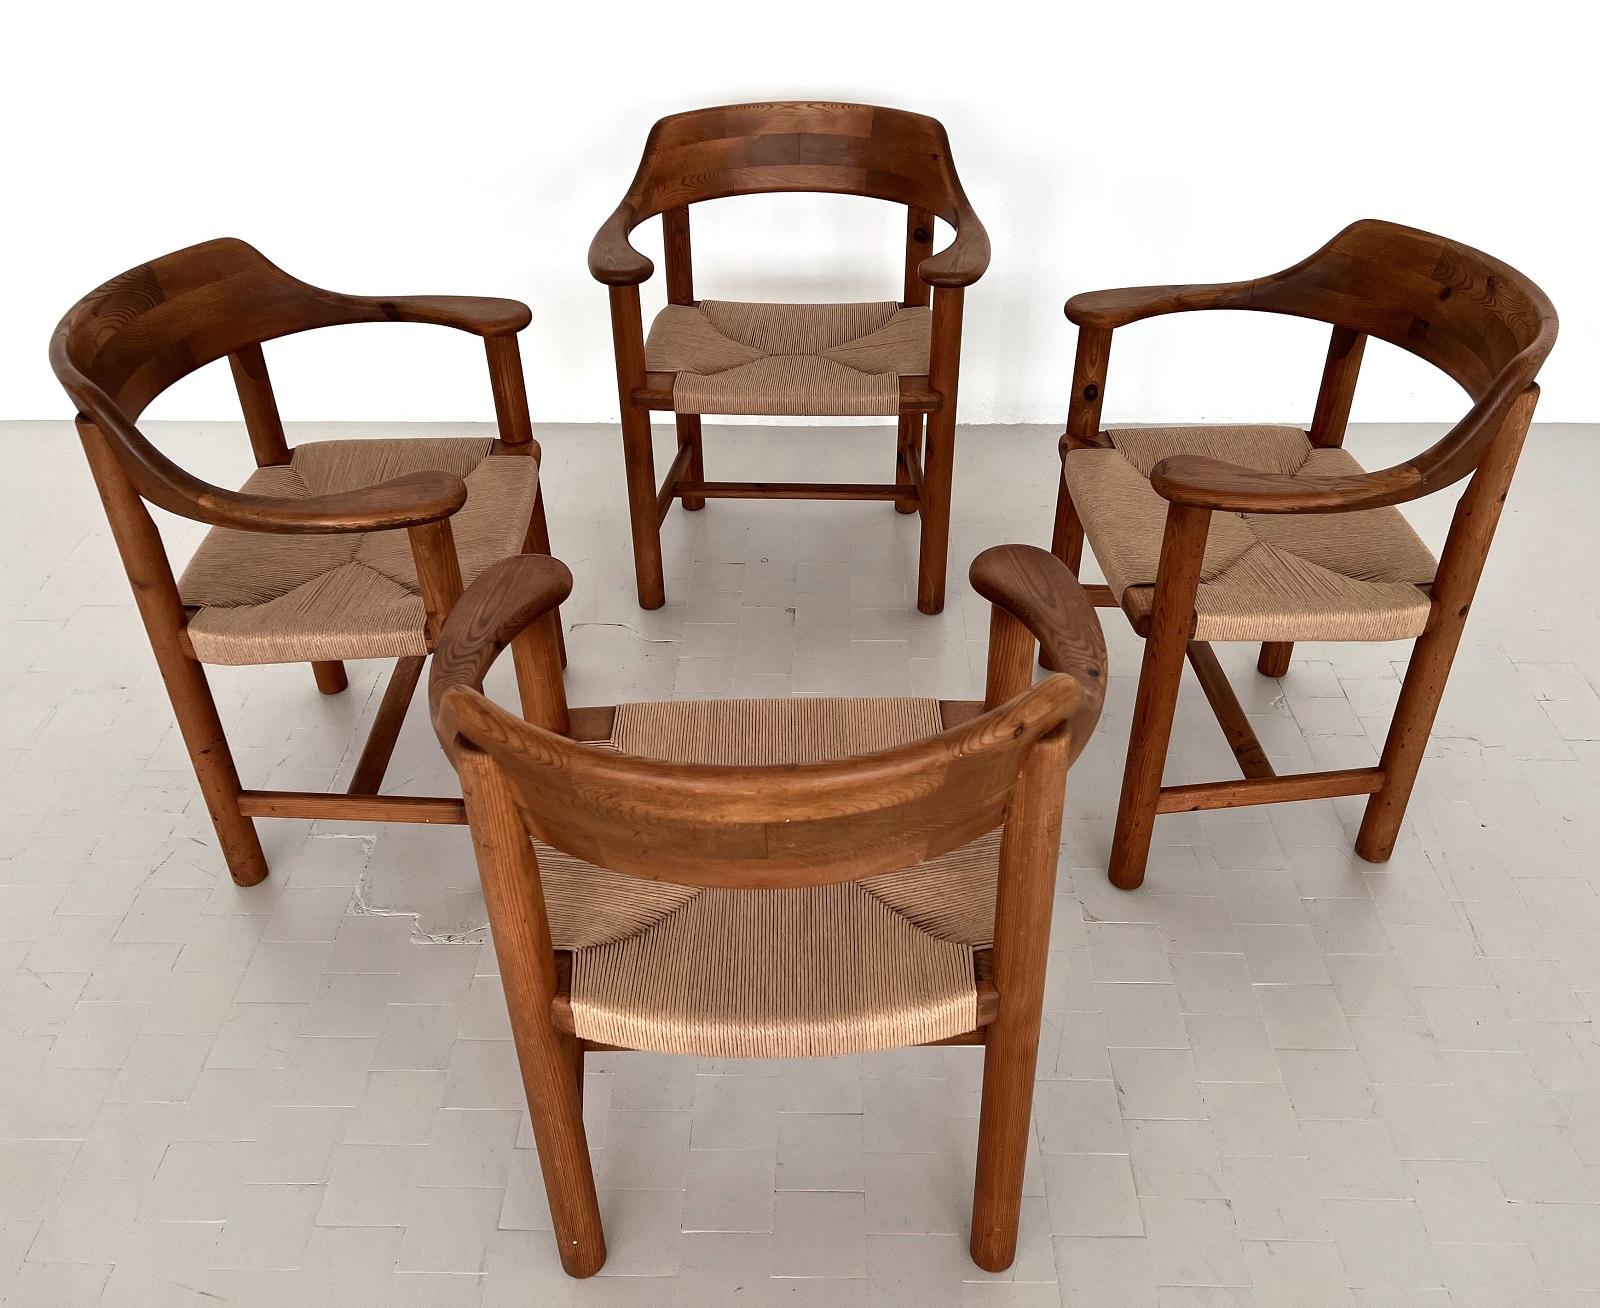 Papercord Rainer Daumiller Dining Chairs in Pine and New Paper Cord, 1970s For Sale